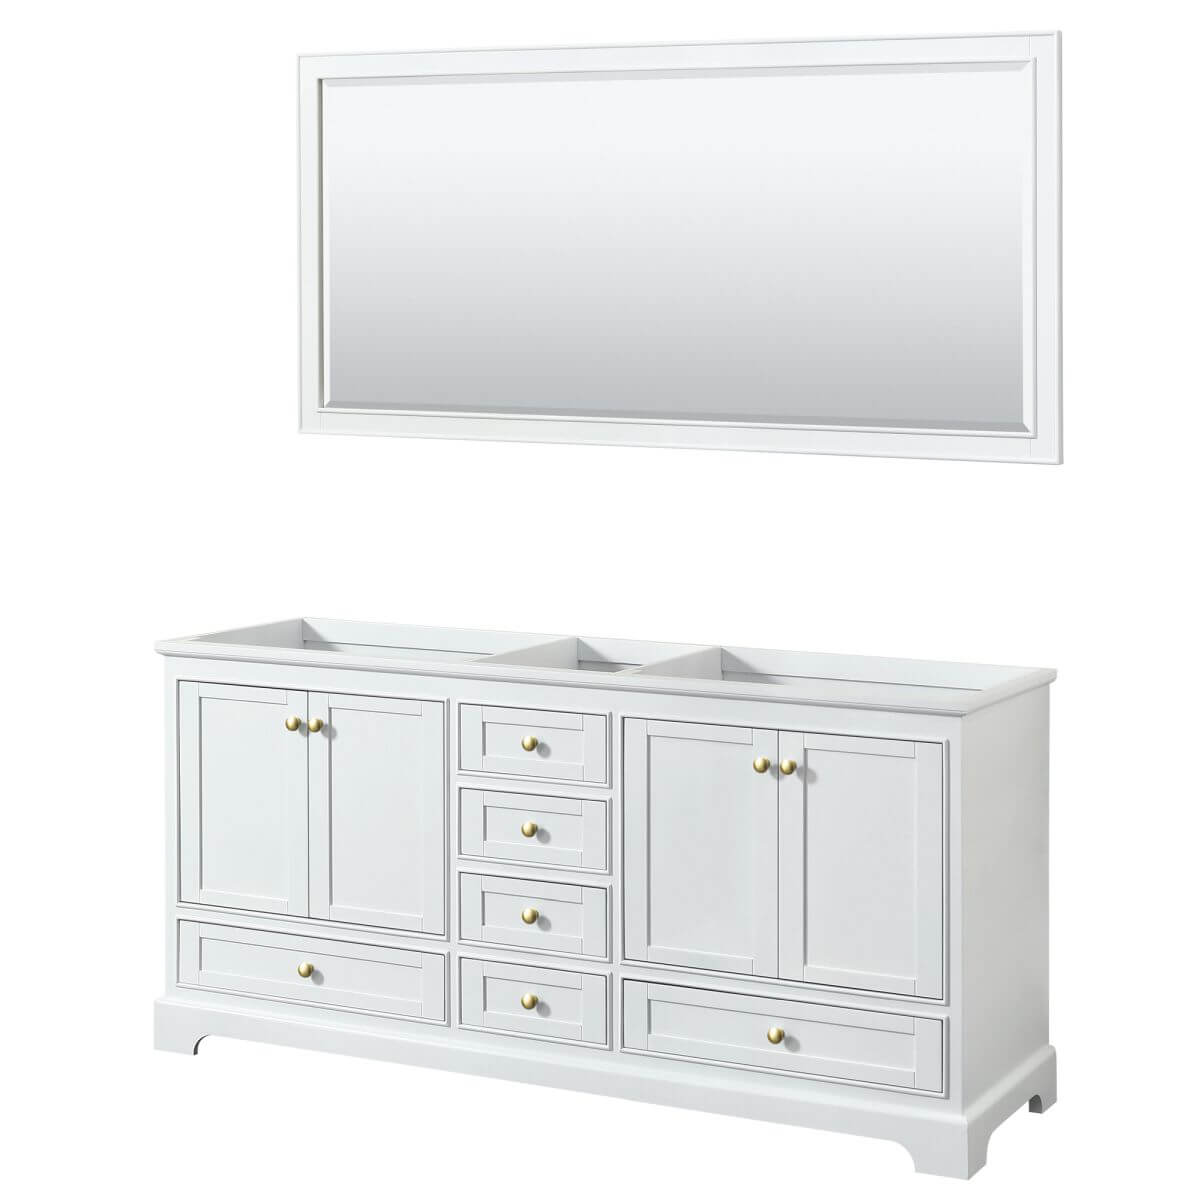 Wyndham Collection Deborah 72 inch Double Bathroom Vanity in White with 70 inch Mirror, Brushed Gold Trim, No Countertop and No Sinks - WCS202072DWGCXSXXM70